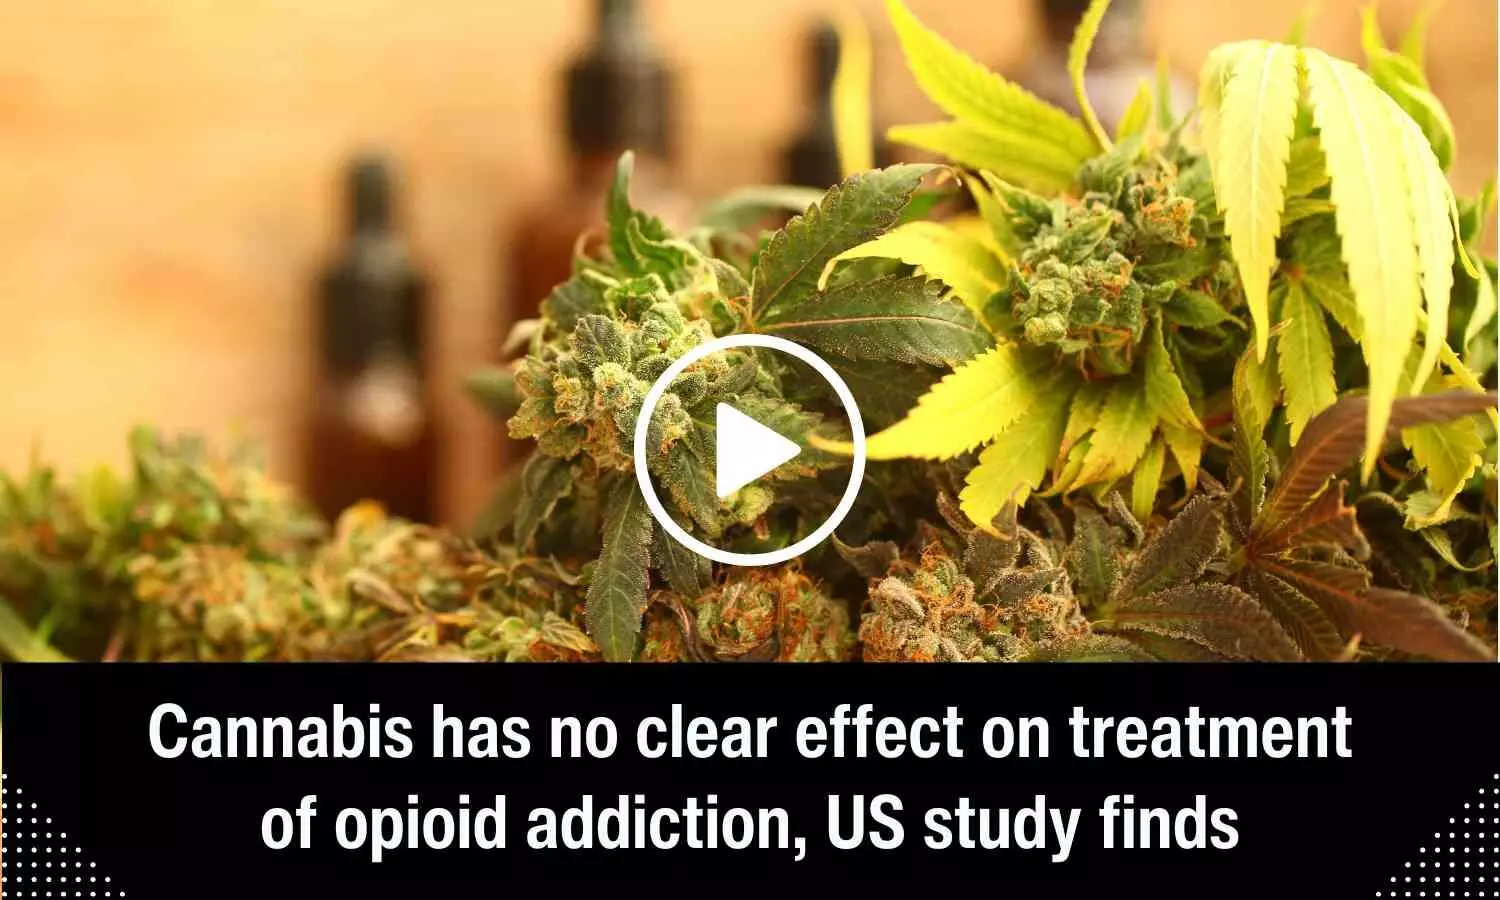 Cannabis has no clear effect on treatment of opioid addiction, US study finds